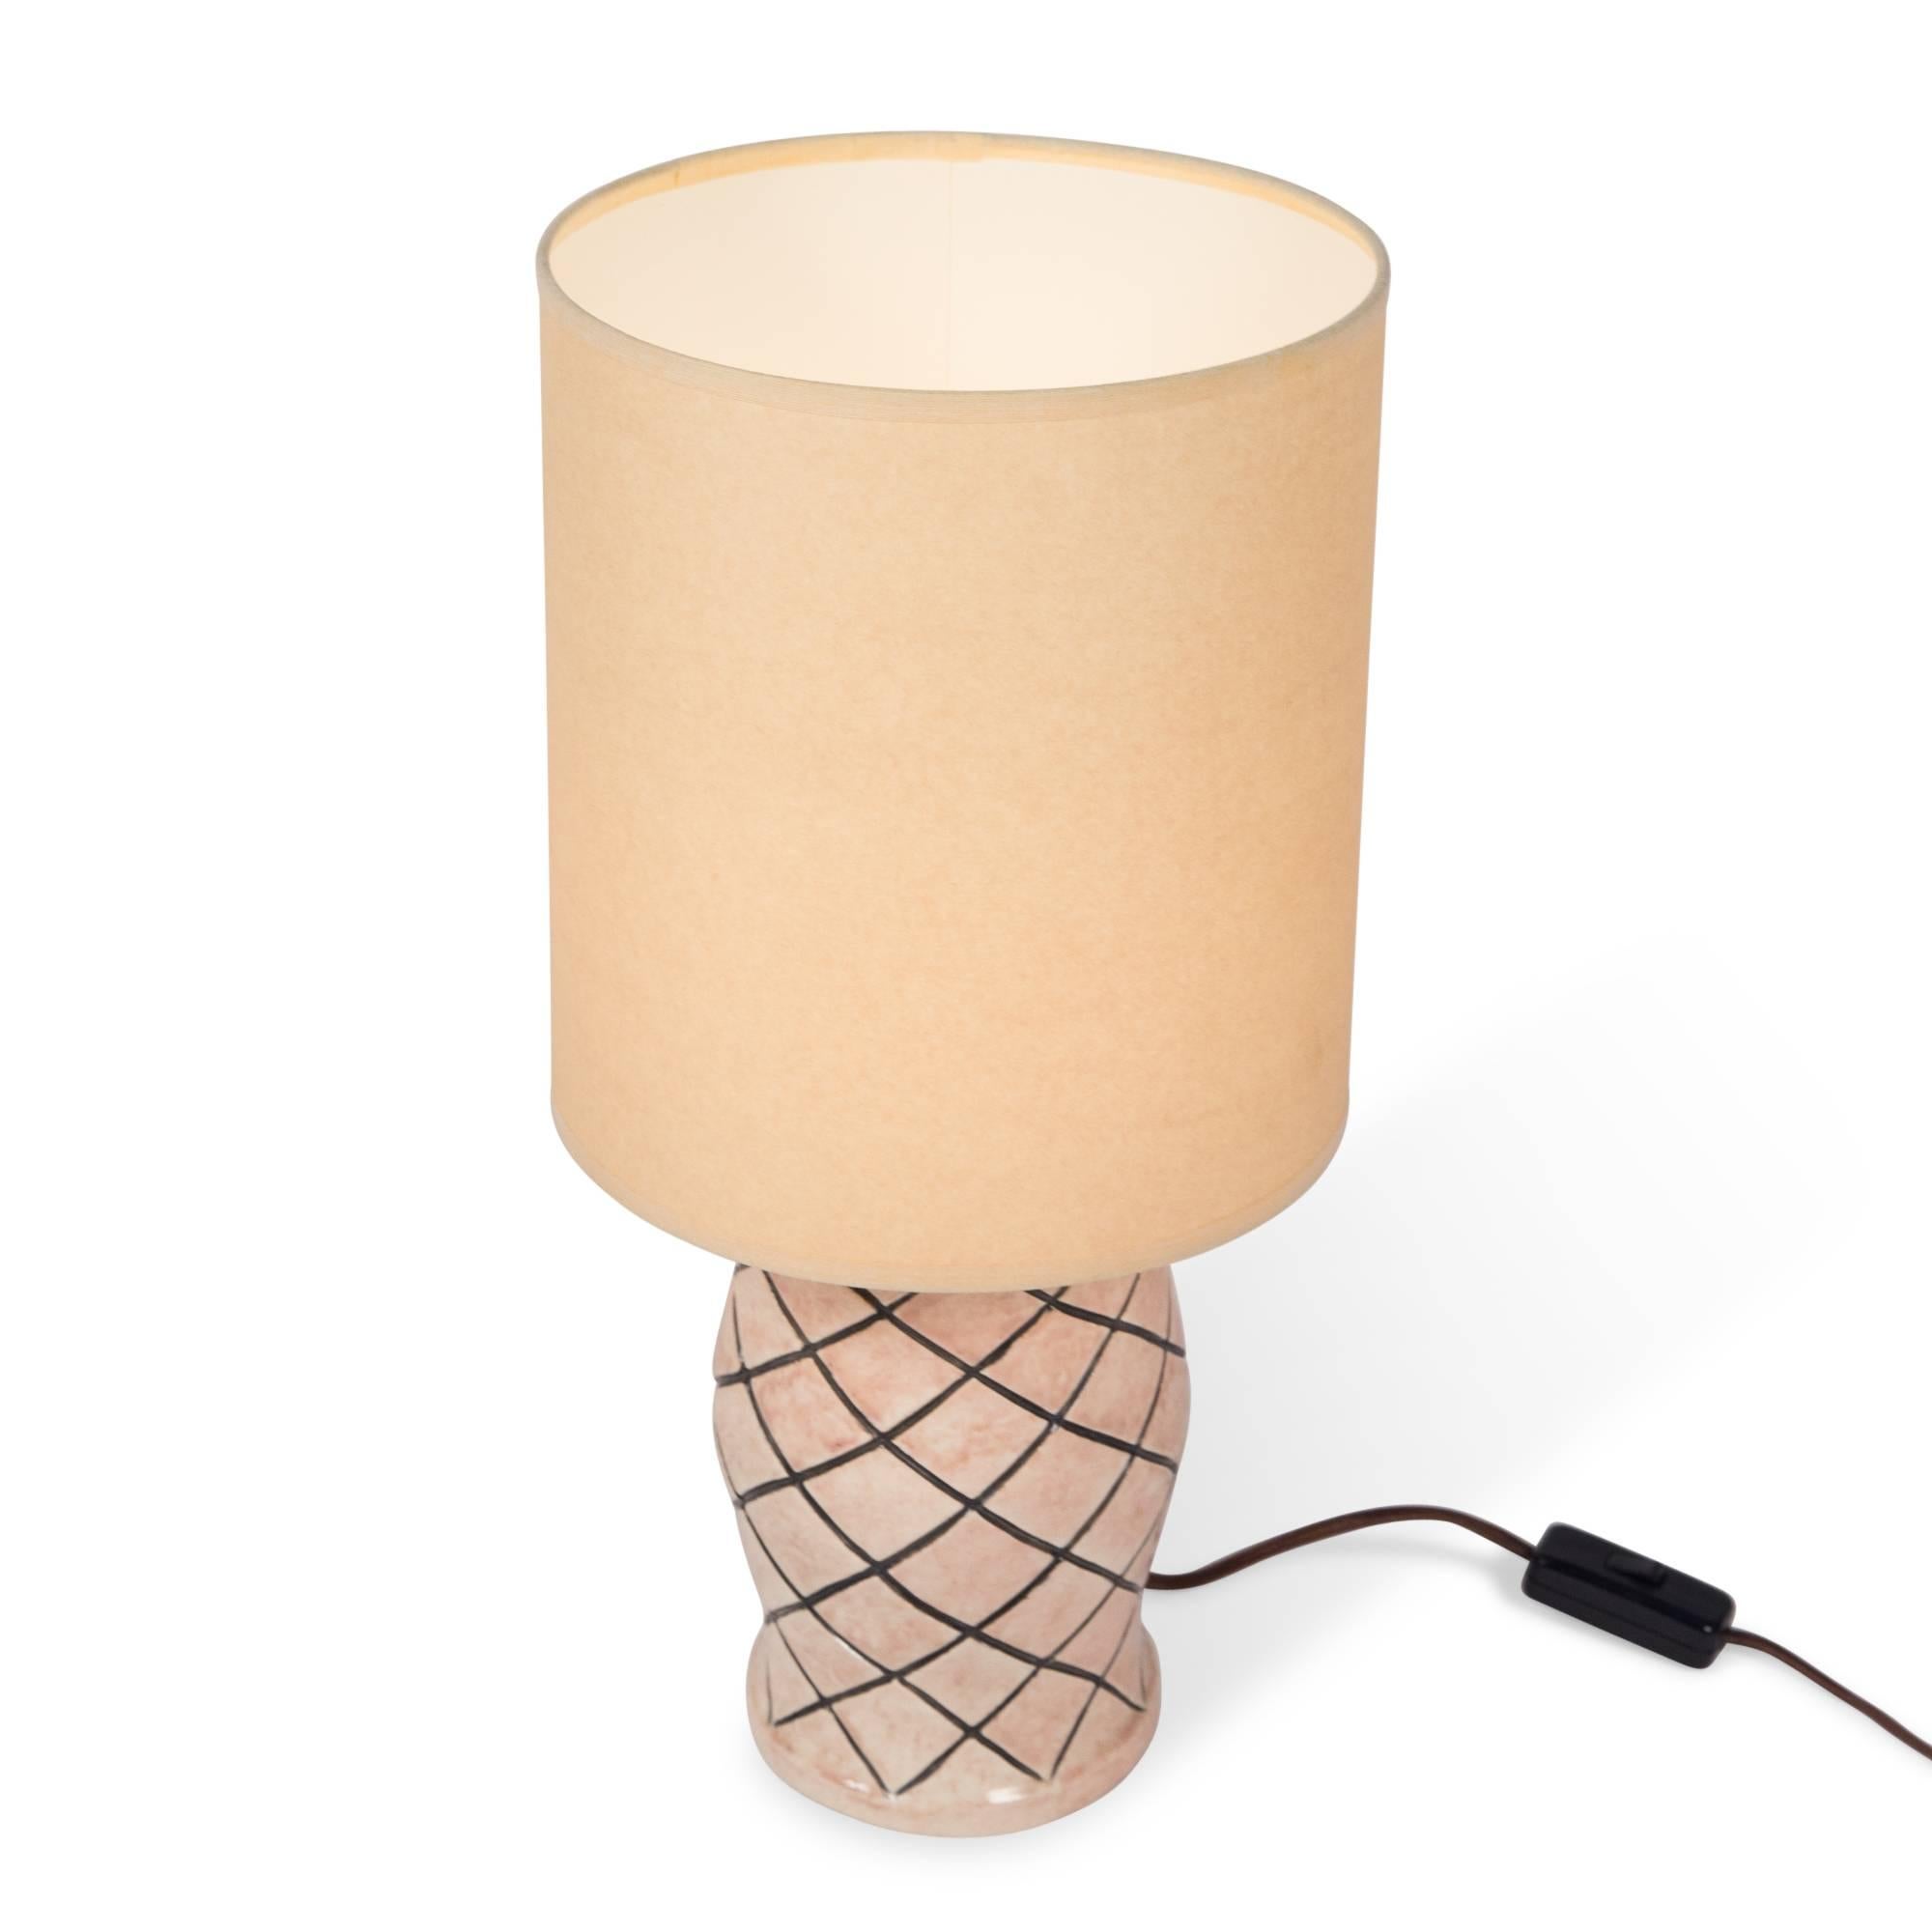 Glazed ceramic table lamp, with black crosshatch pattern, France, 1930s. Signed Nildes. Overall height 18 1/2 in, diameter of base 5 1/2 in. Shade measures diameter 9 in, height 10 in.